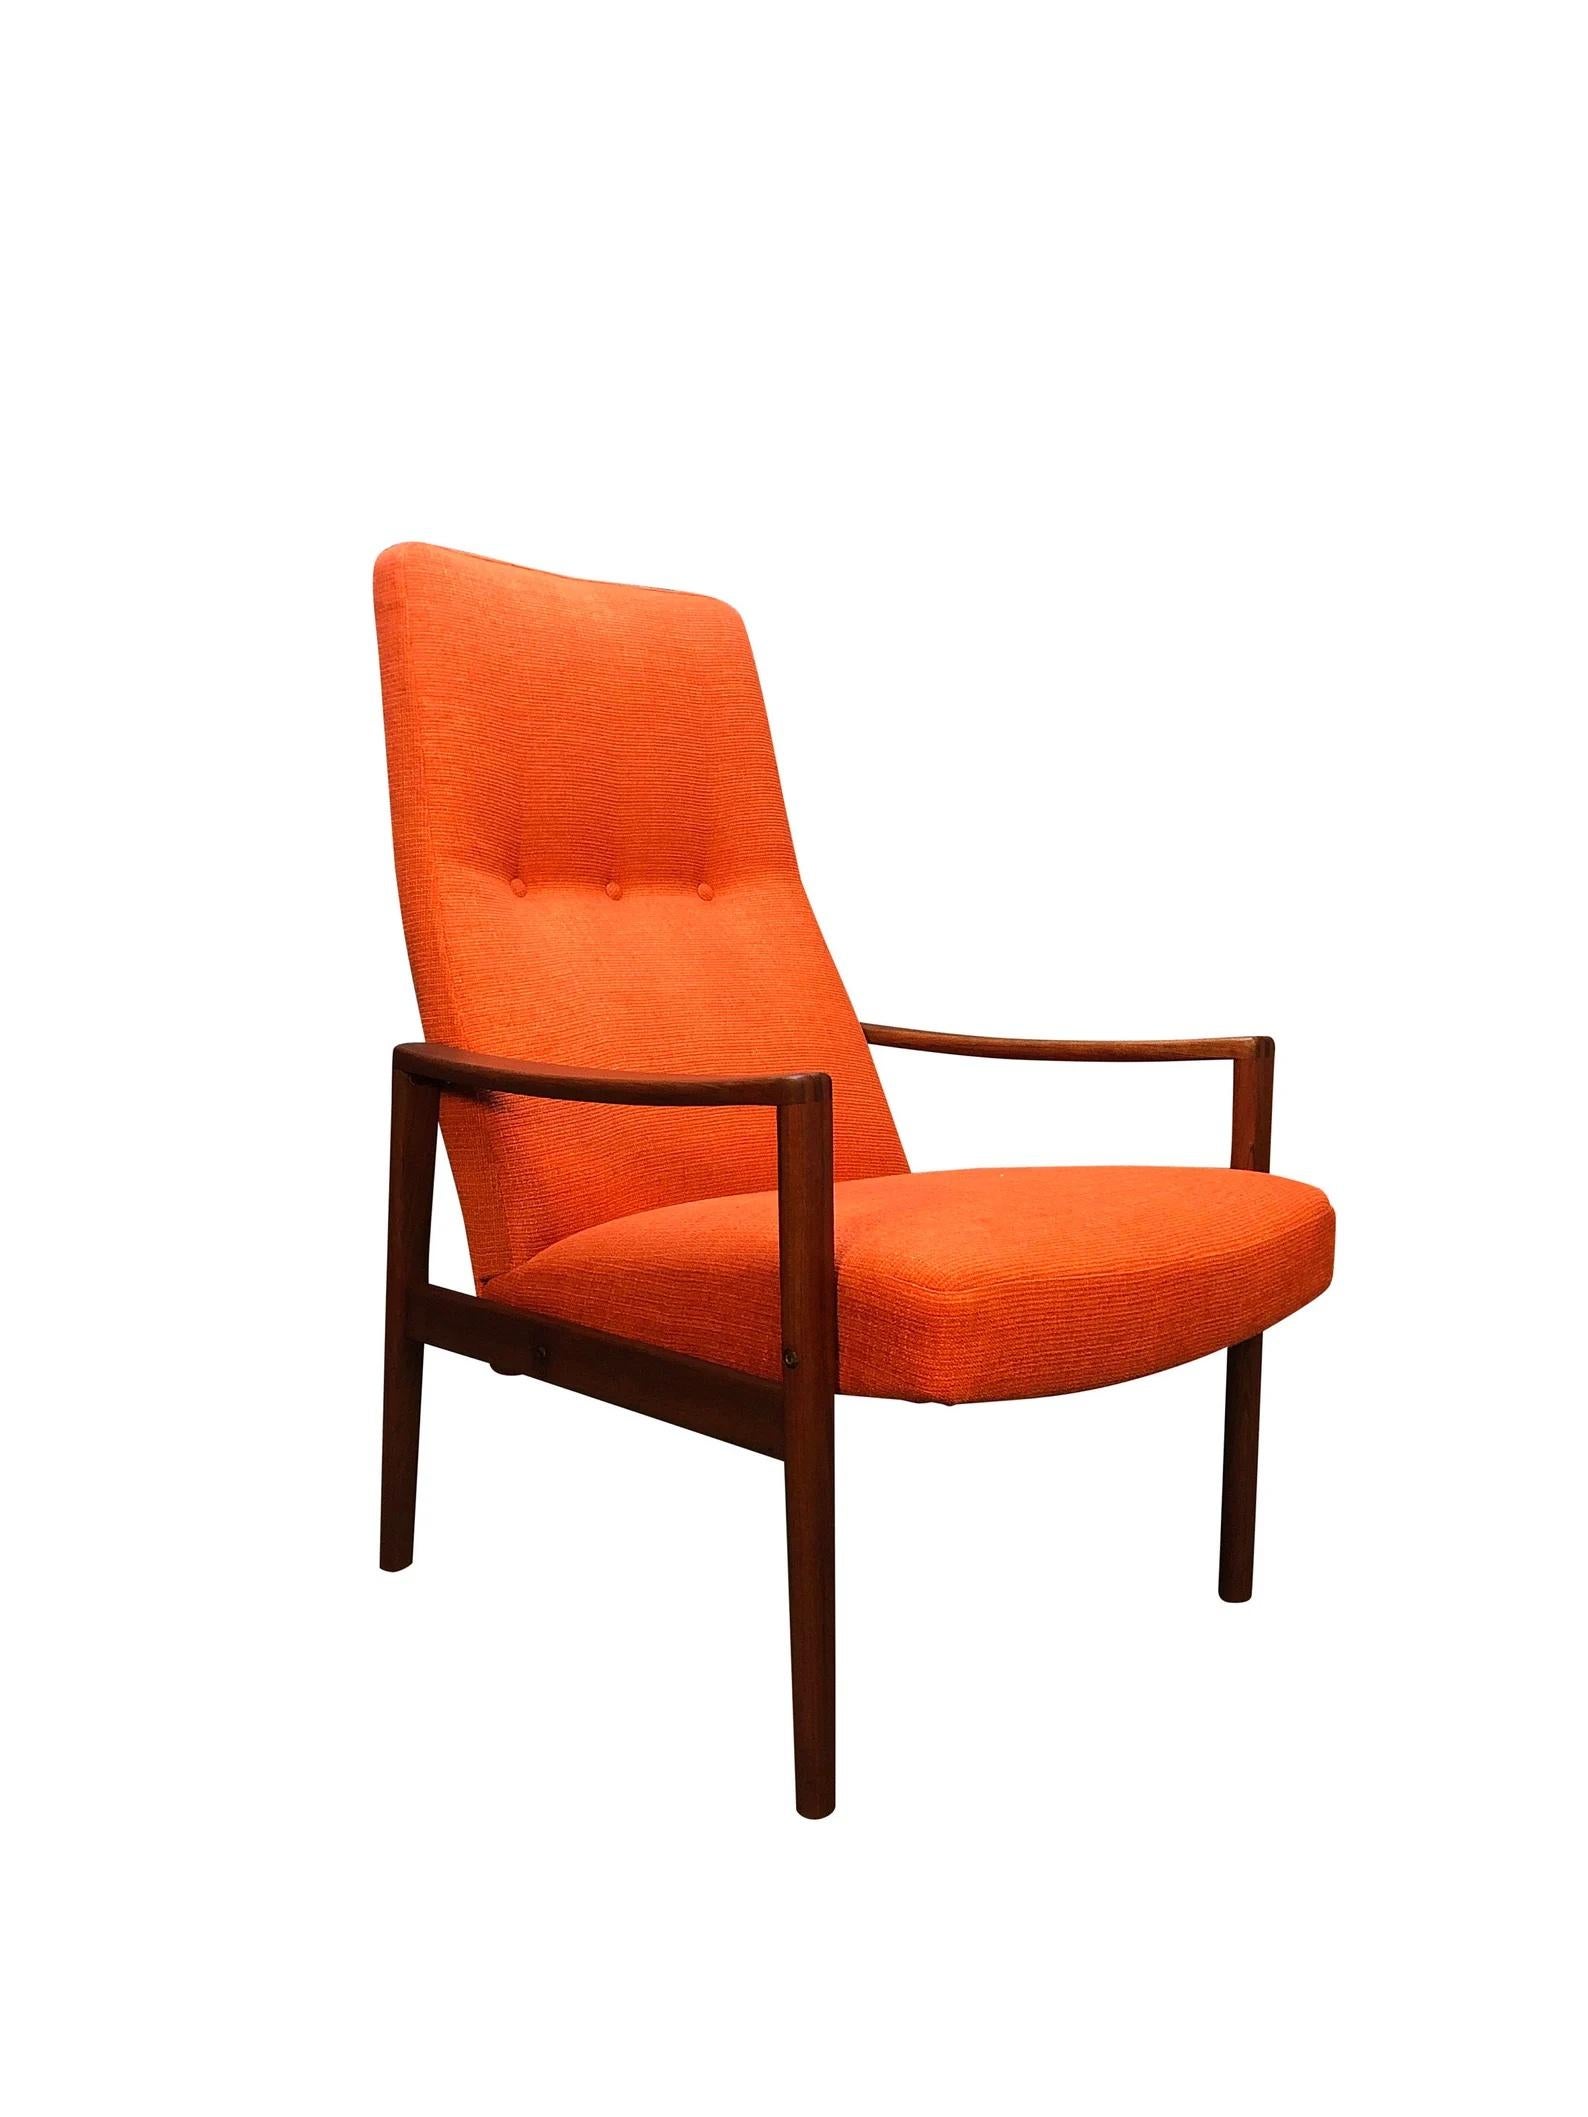 Here is a beautiful lounge chair manufactured in Sweden for Ulferts Fabriker circa 1960s, this high-backed lounge chair has a great look. Chair has been completely refinished and has brand new high quality orange fabric that will look great in your